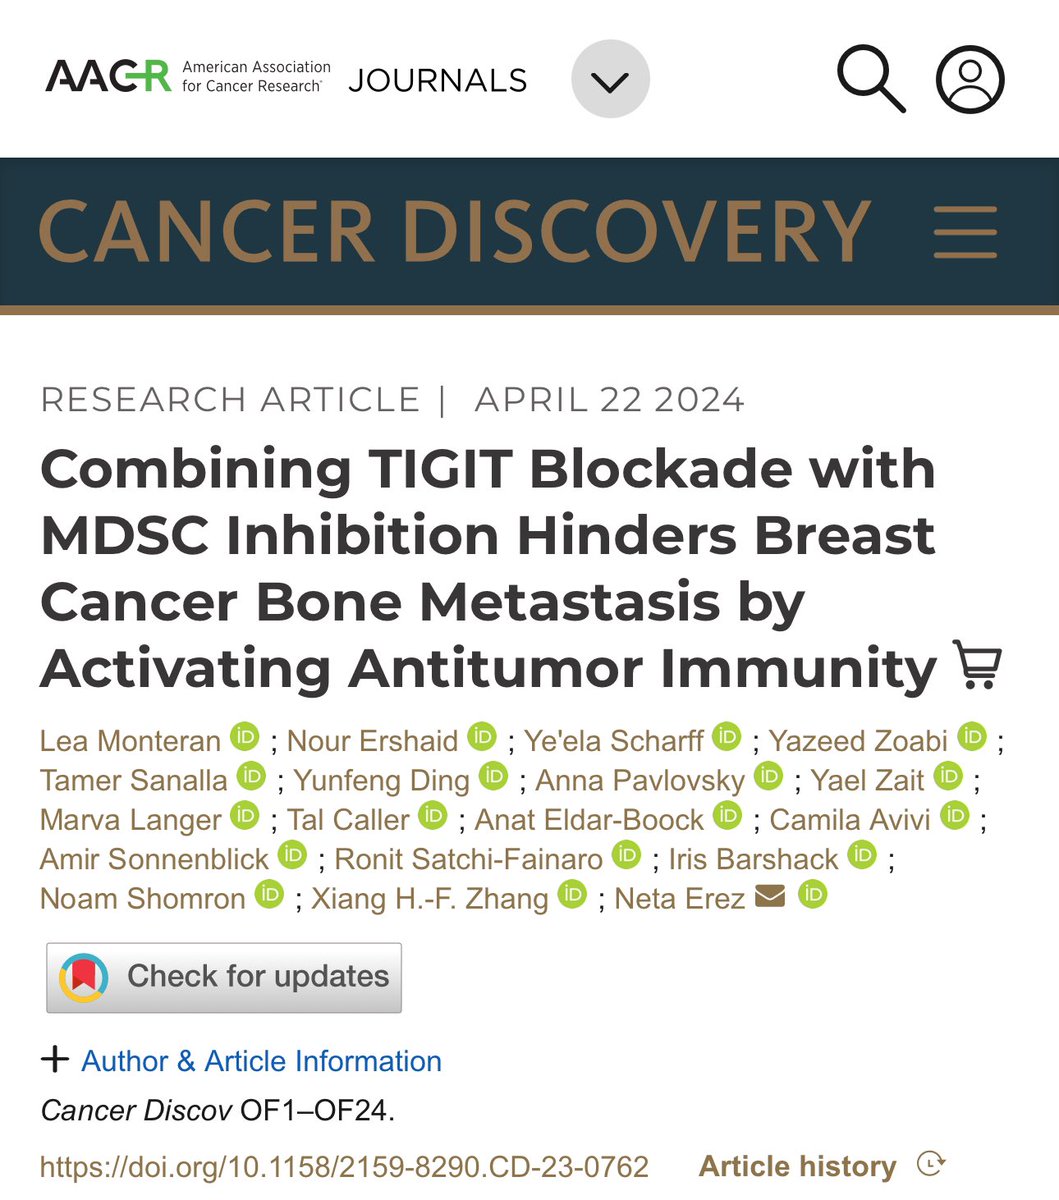 Combining TIGIT Blockade with MDSC Inhibition Hinders Breast Cancer Bone Metastasis by Activating Antitumor Immunity

@CD_AACR @AACR @OncoAlert @oncodaily #MedEd #MedX #Oncology #Breastcancer 

 doi.org/10.1158/2159-8…